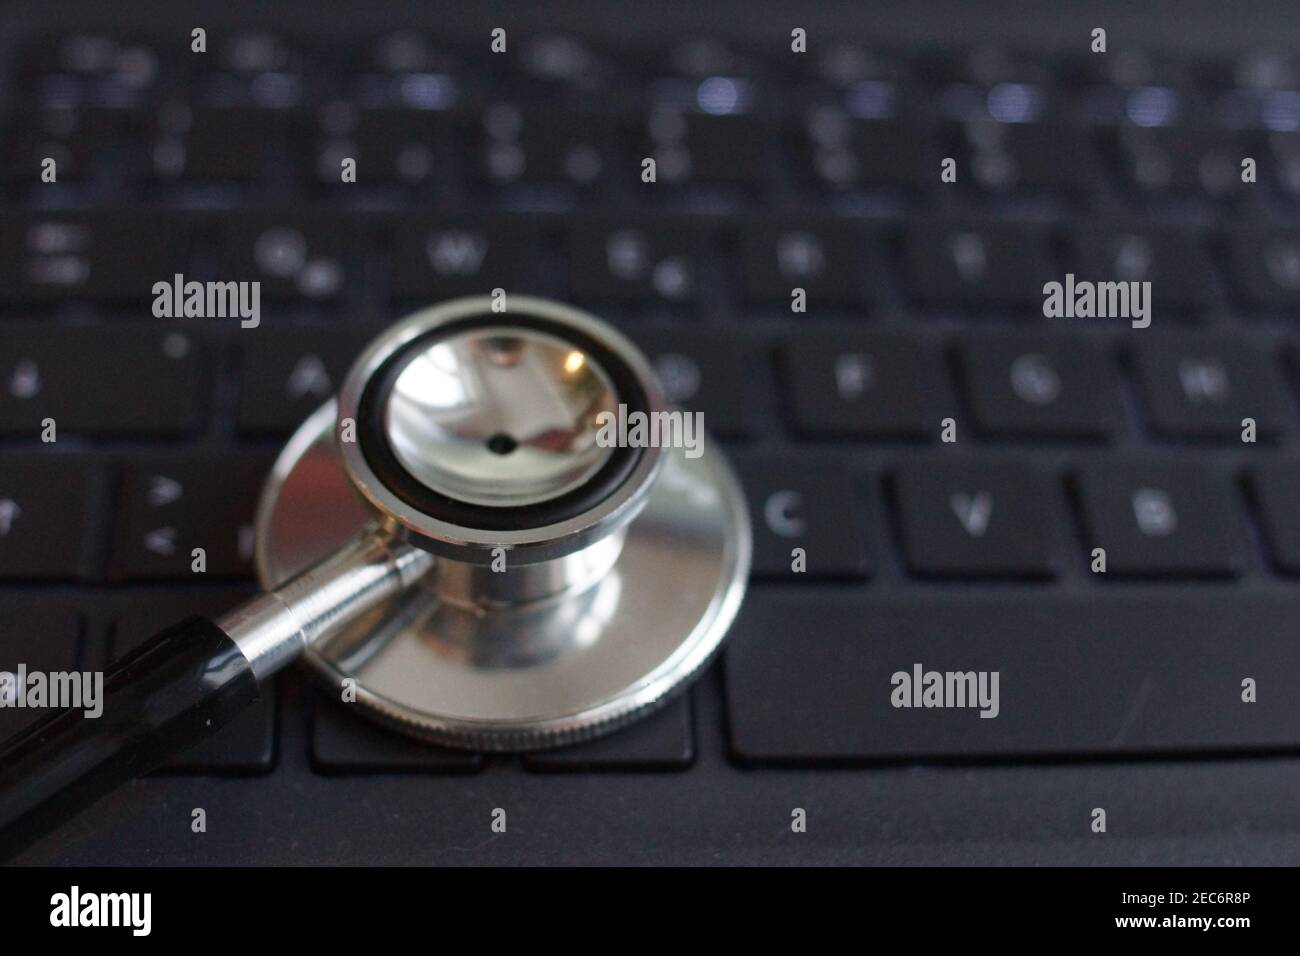 Stethoscope on a computer keyboard. Stock Photo